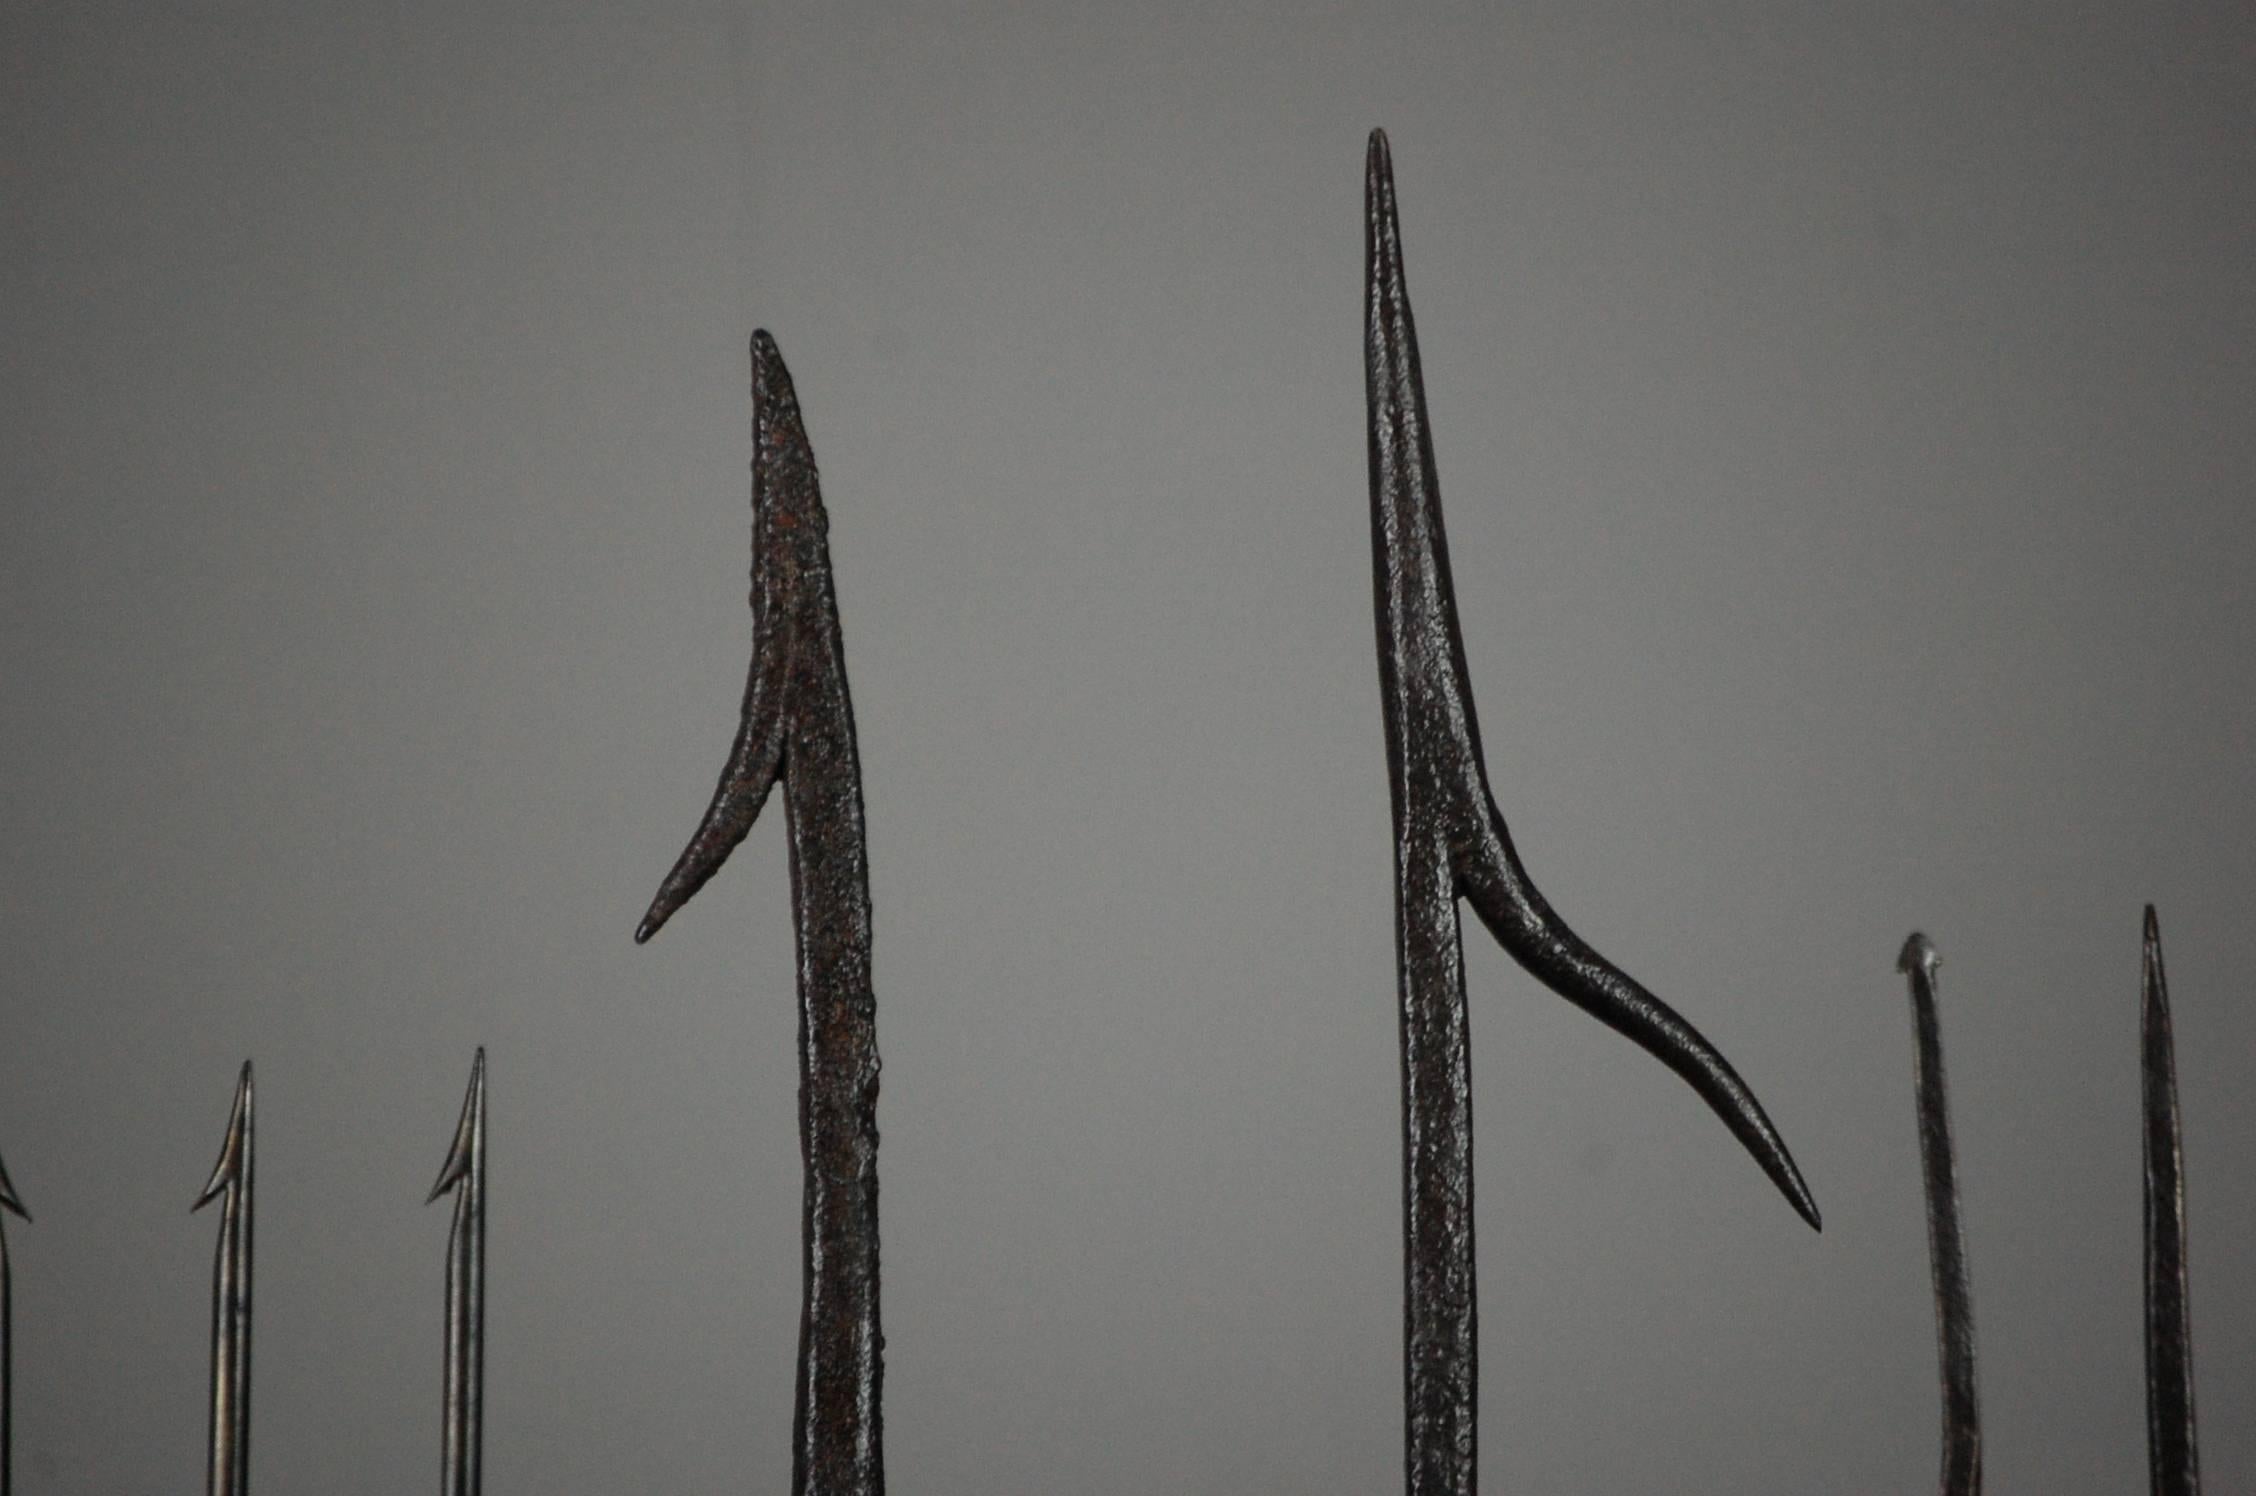 English Collection of Wrought Iron 19th-18th Century Fish Spears